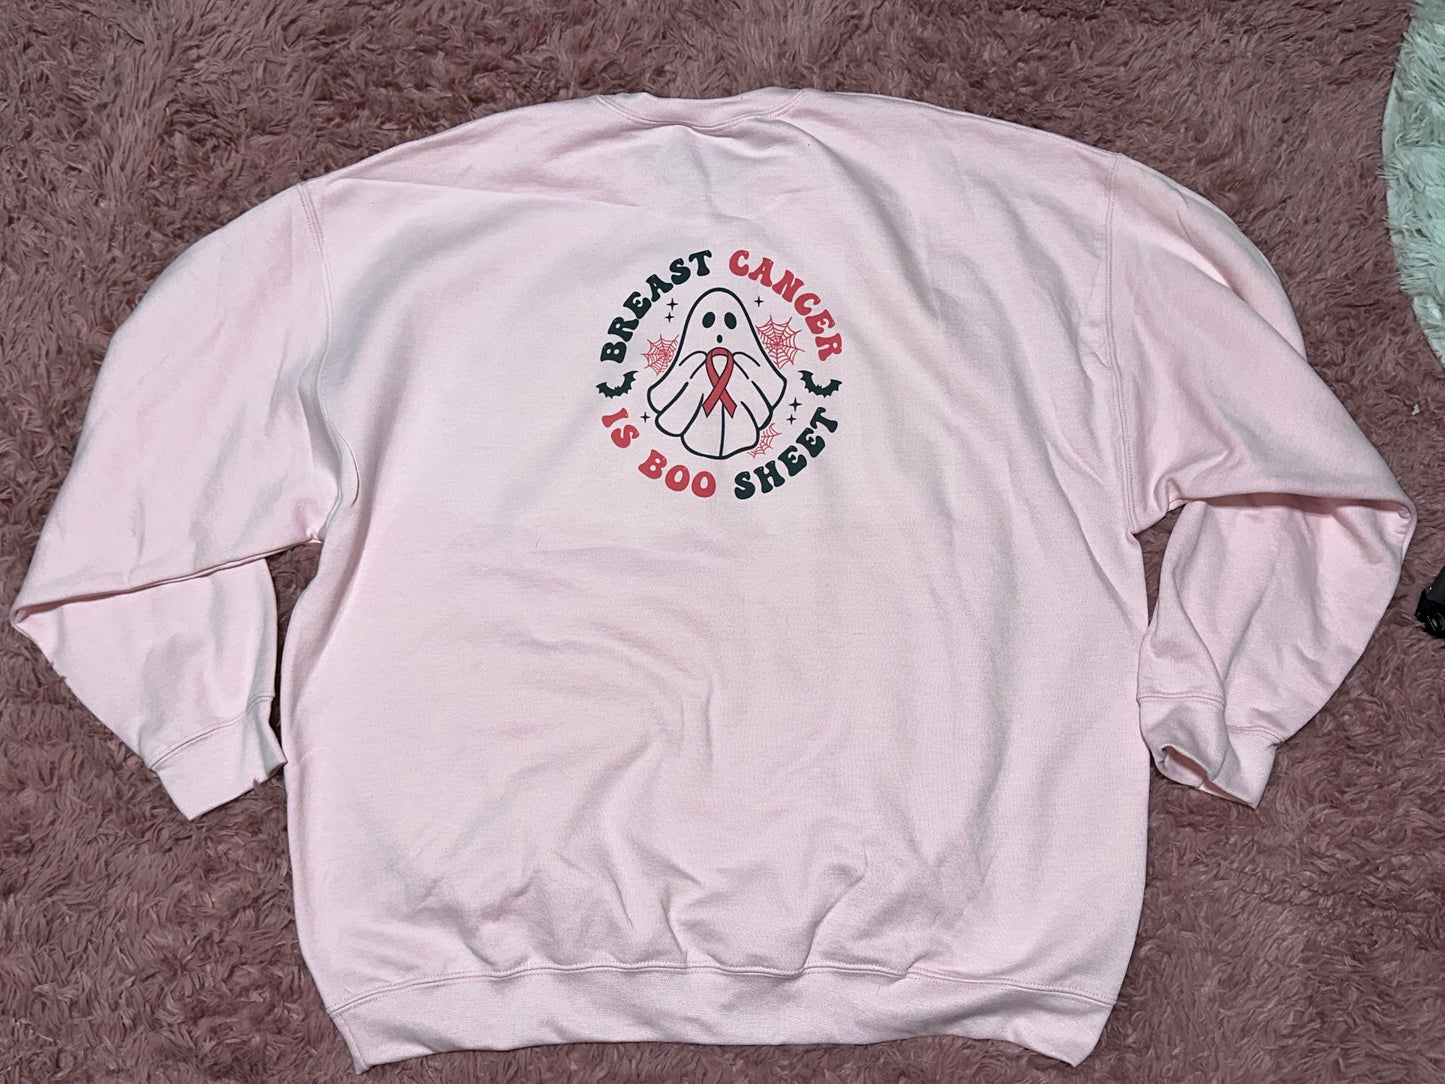 Breast cancer is boo sheet crewneck